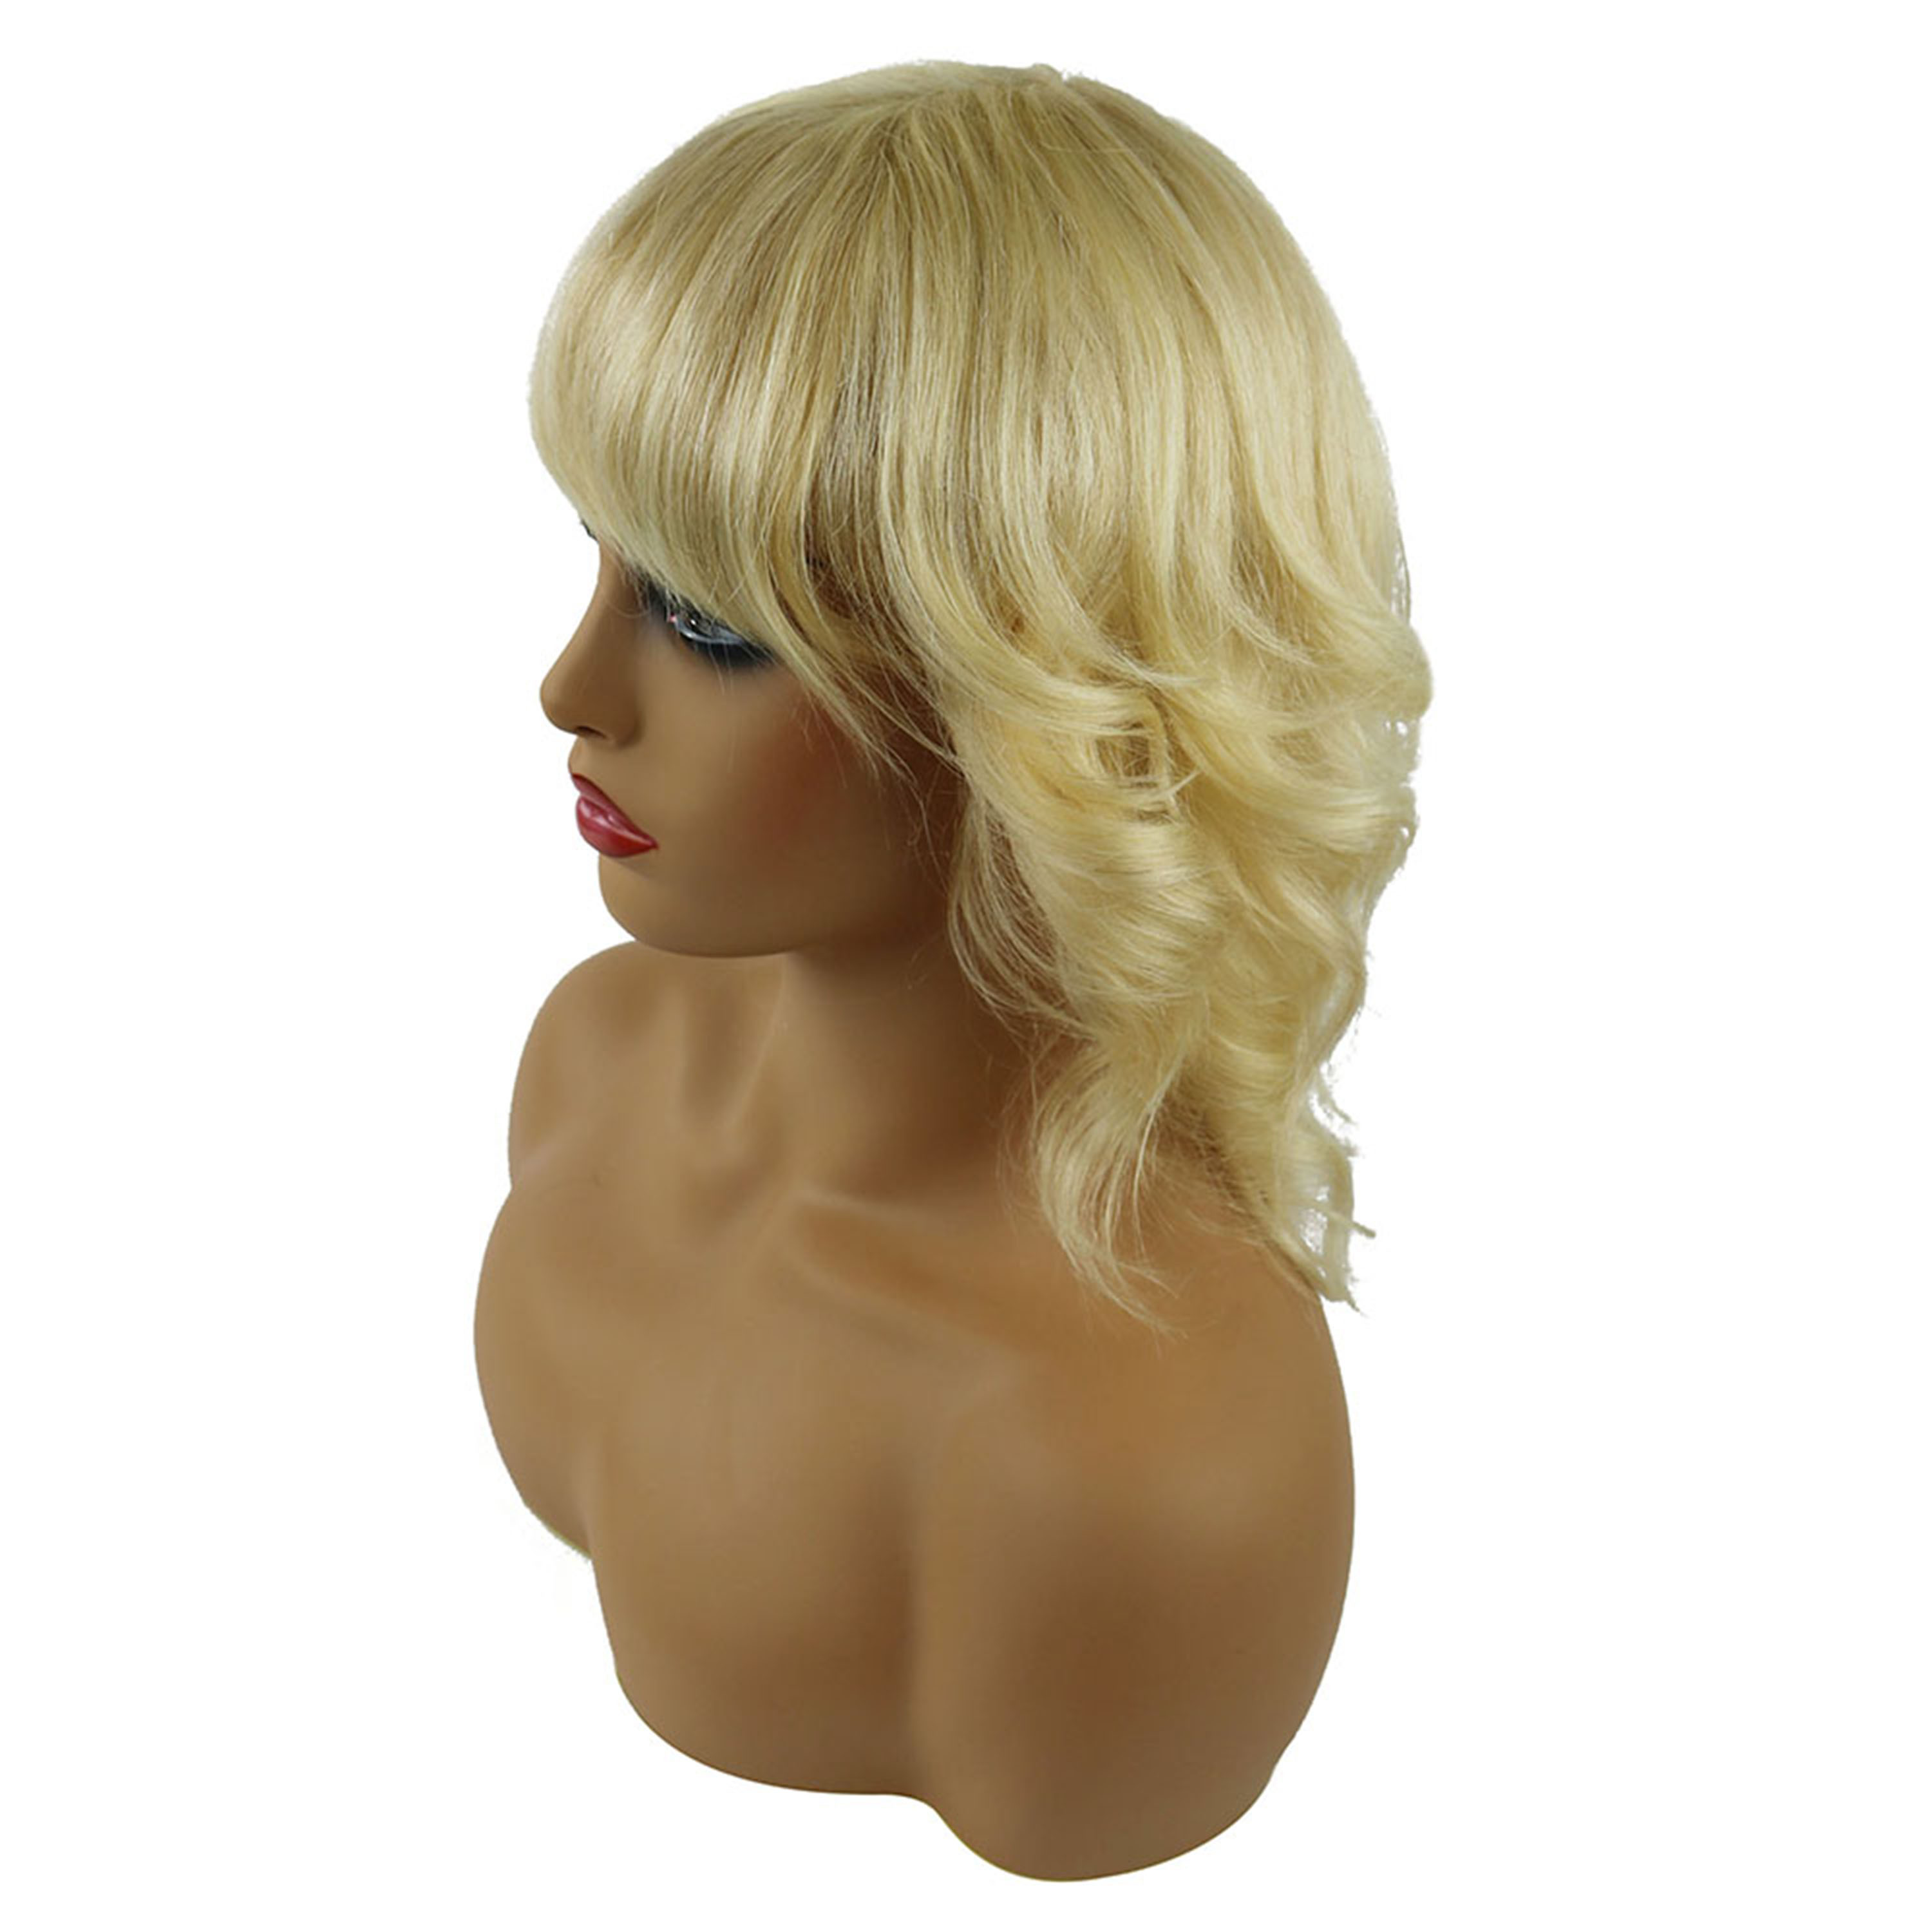 Hot Loyered Loose Wave Human Hairstyle Capless Women Wig 12 Inches